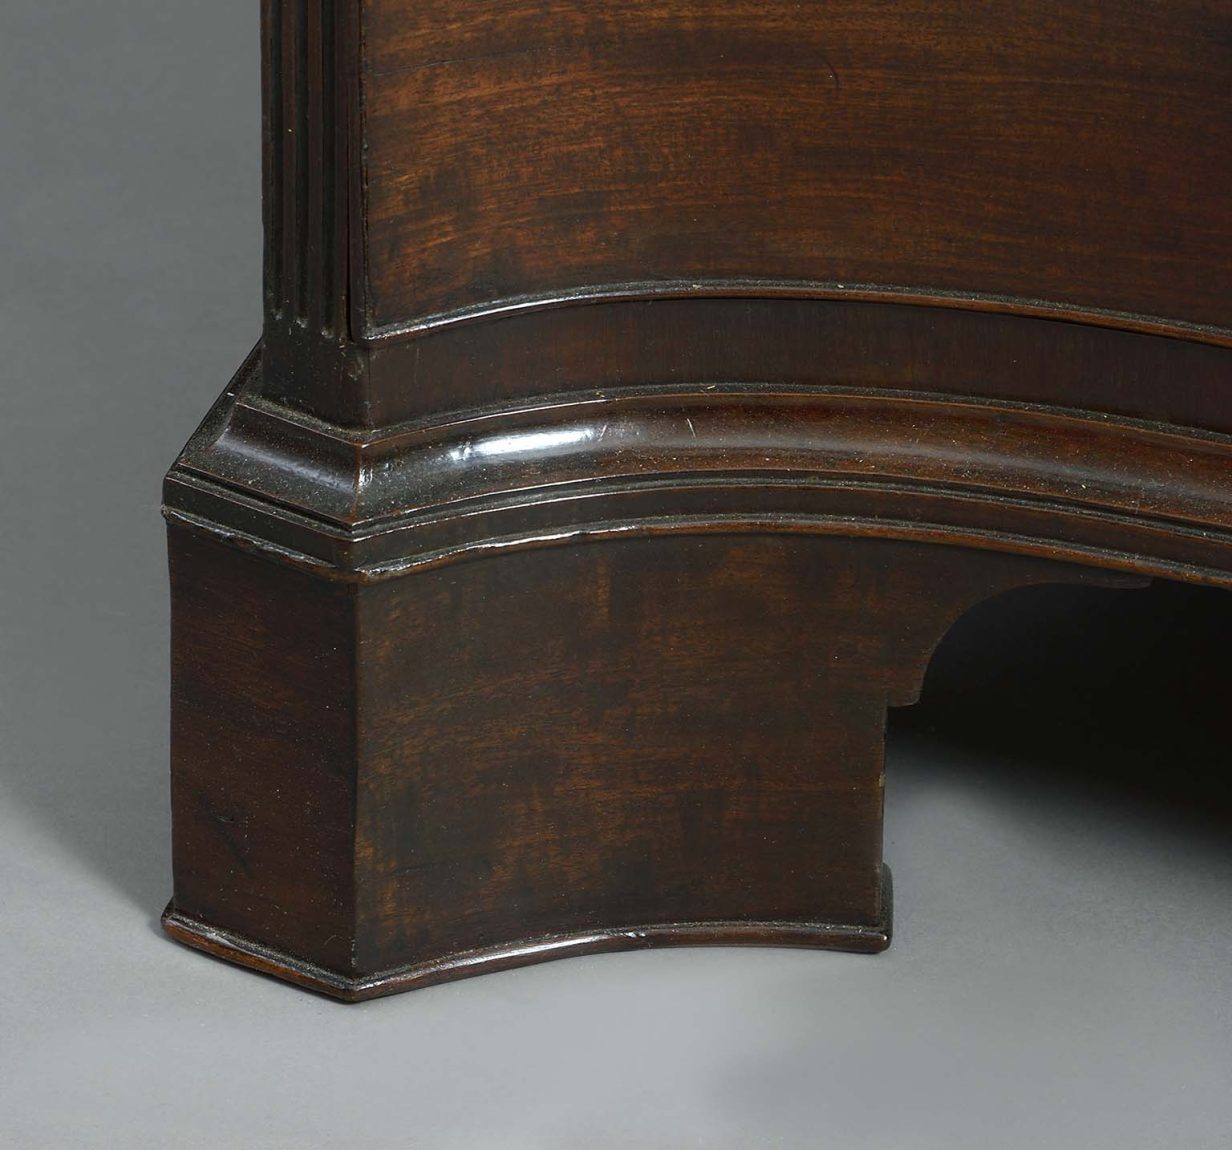 Mid-18th century chippendale period serpentine mahogany dressing chest